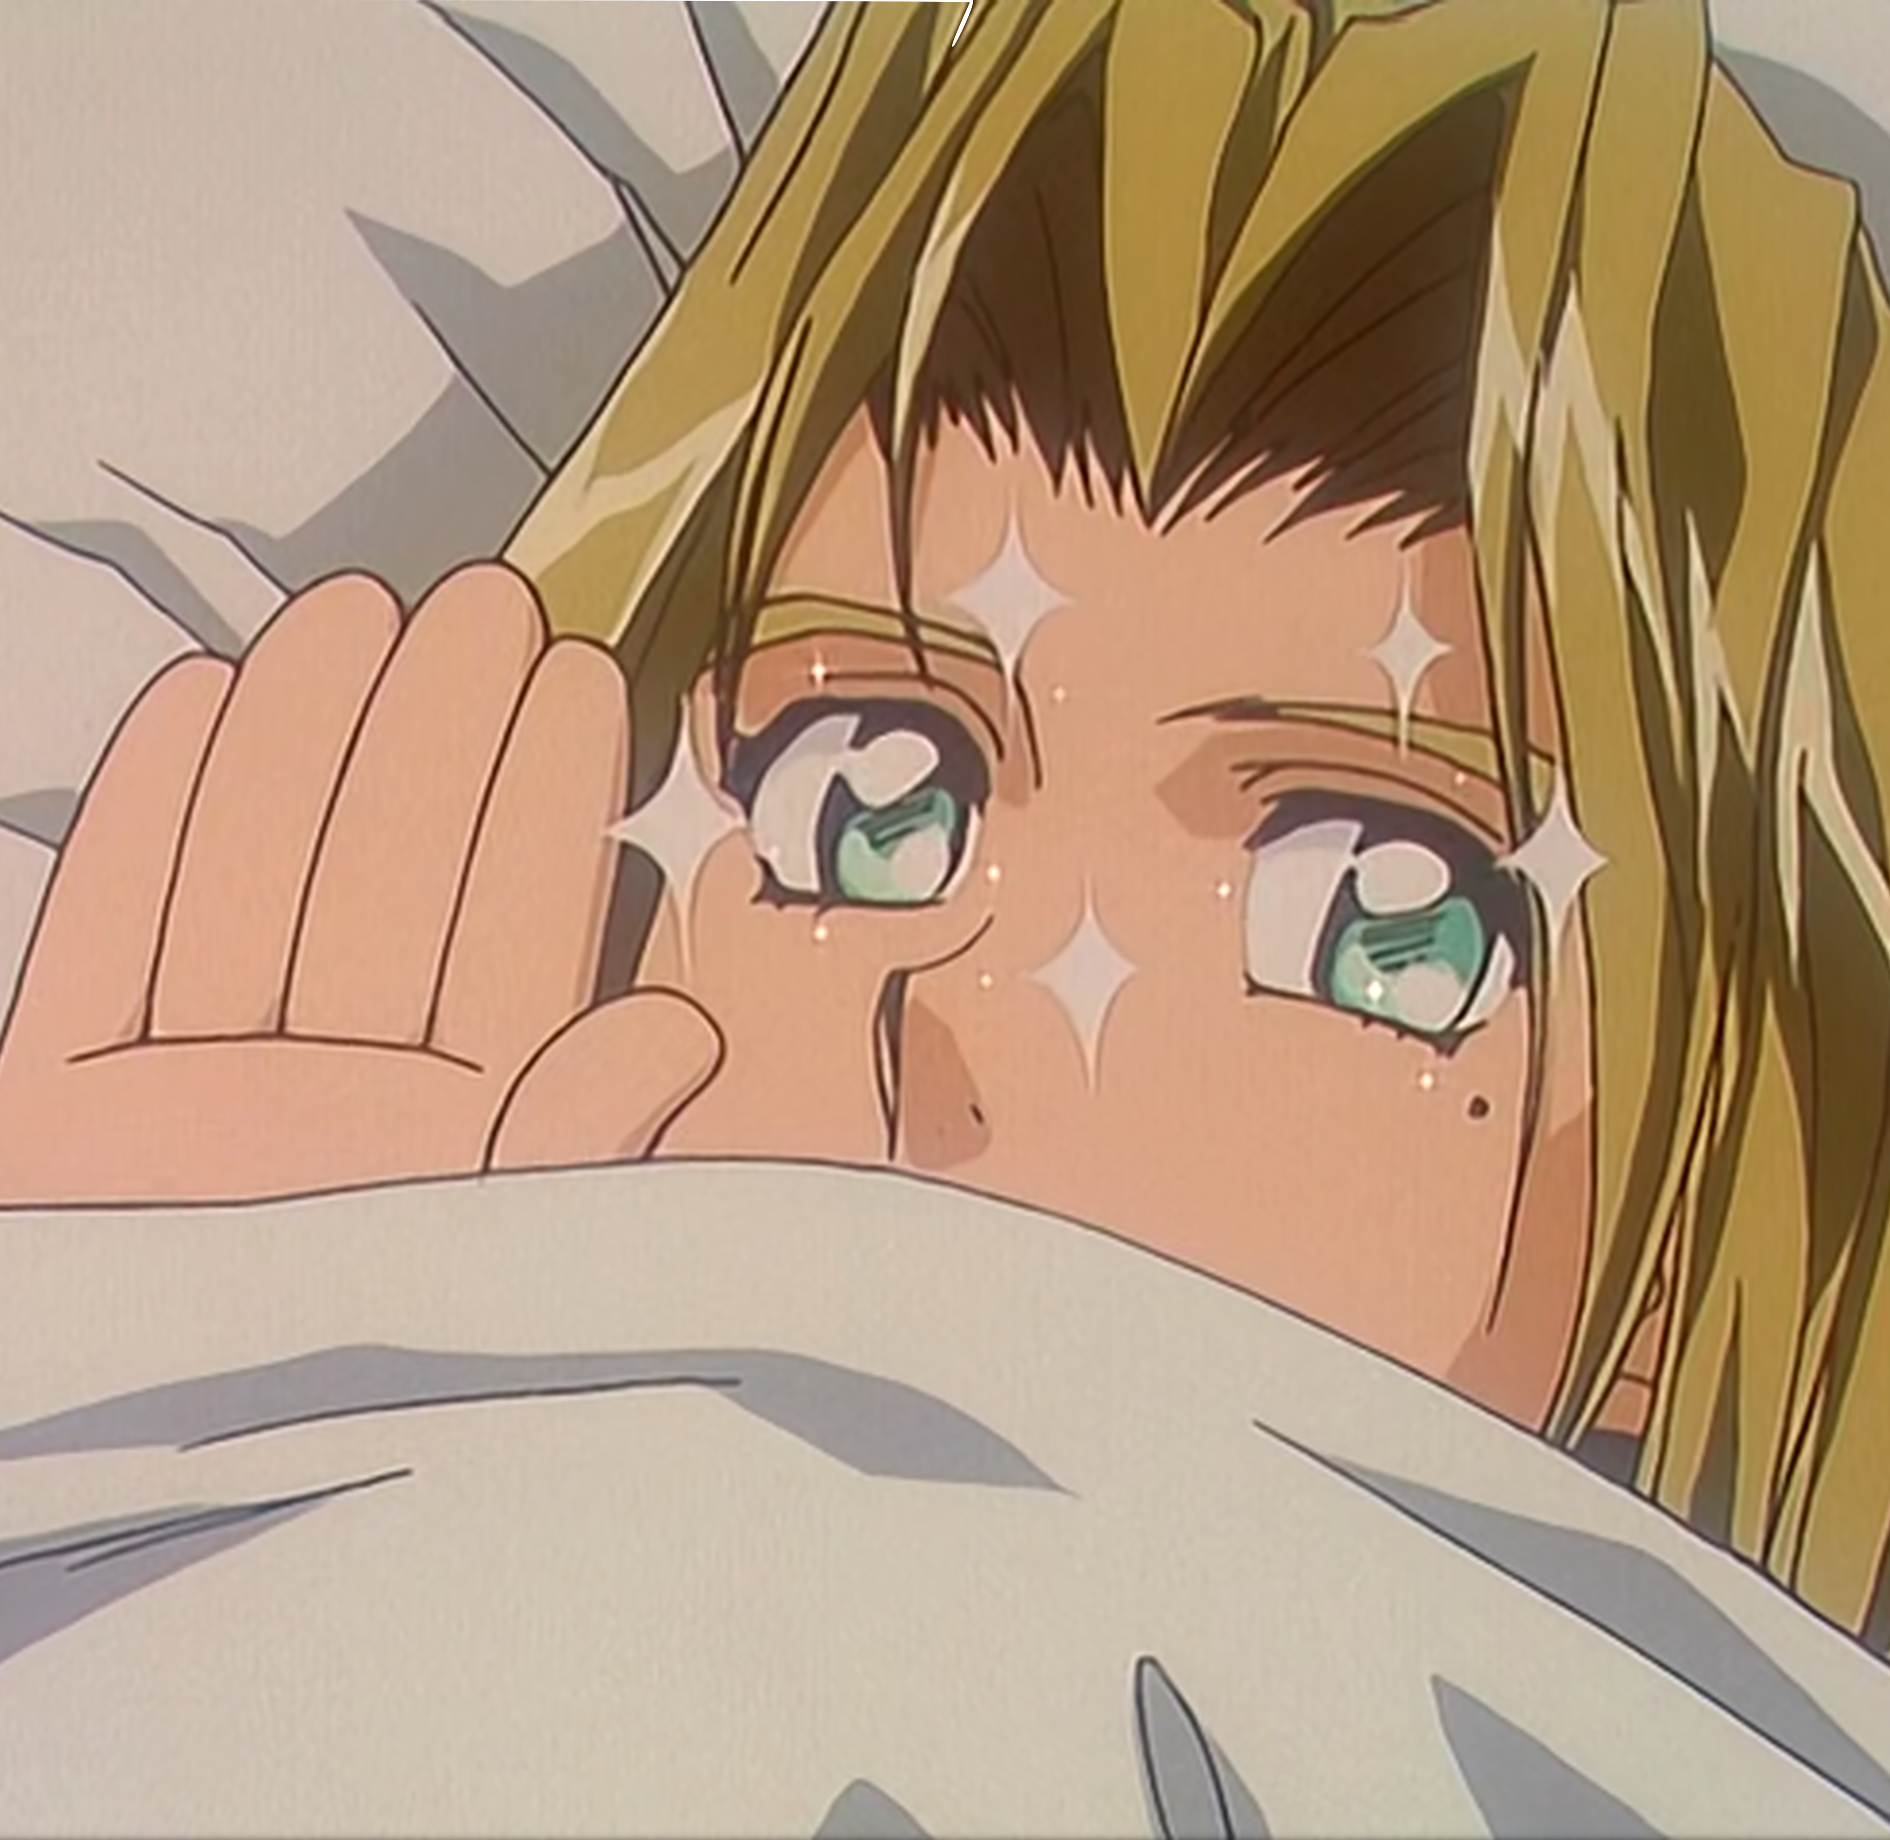 Trigun Episode 18 at roughly 11 minutes in.